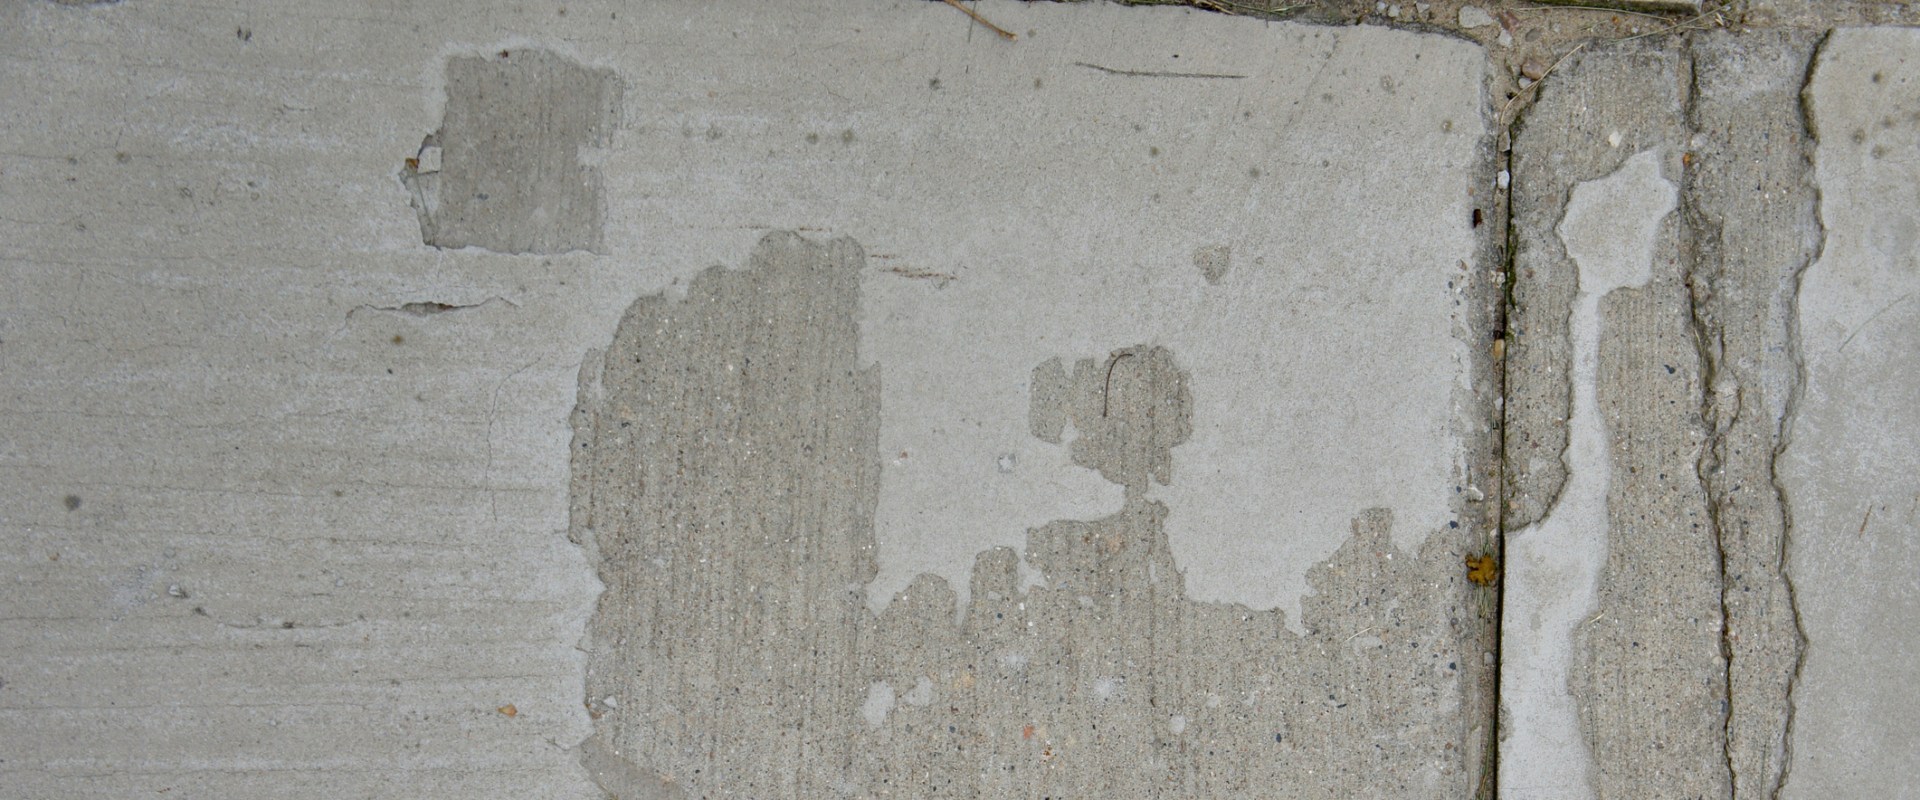 Why does concrete spalling occur and how can it be prevented?